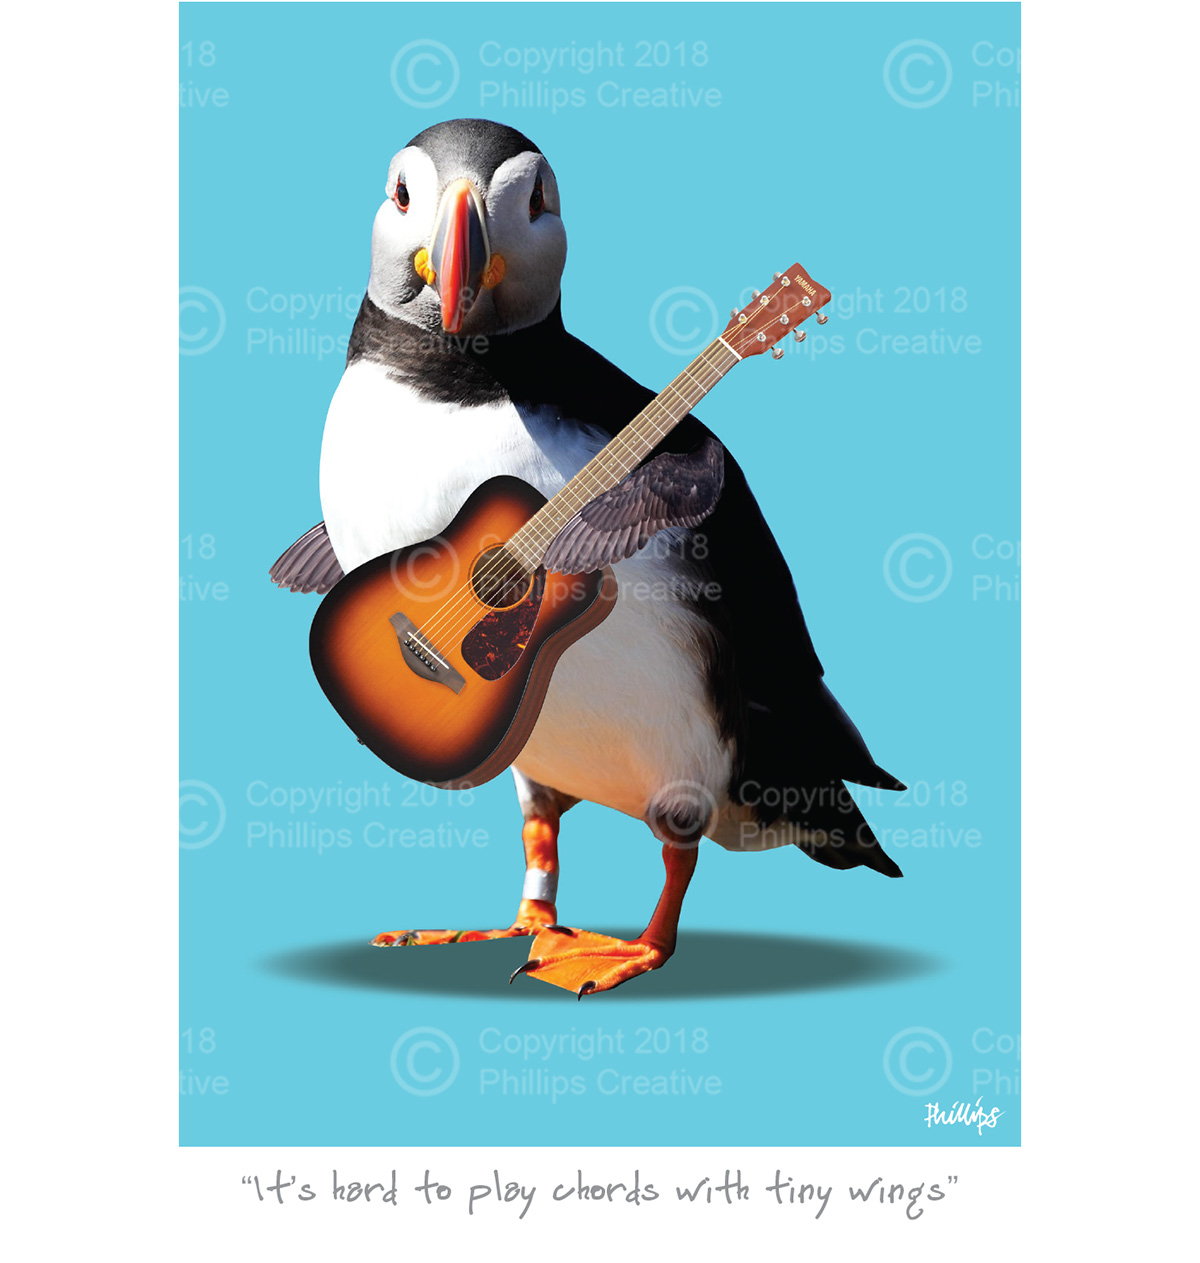 It’s hard to play chords with tiny wings